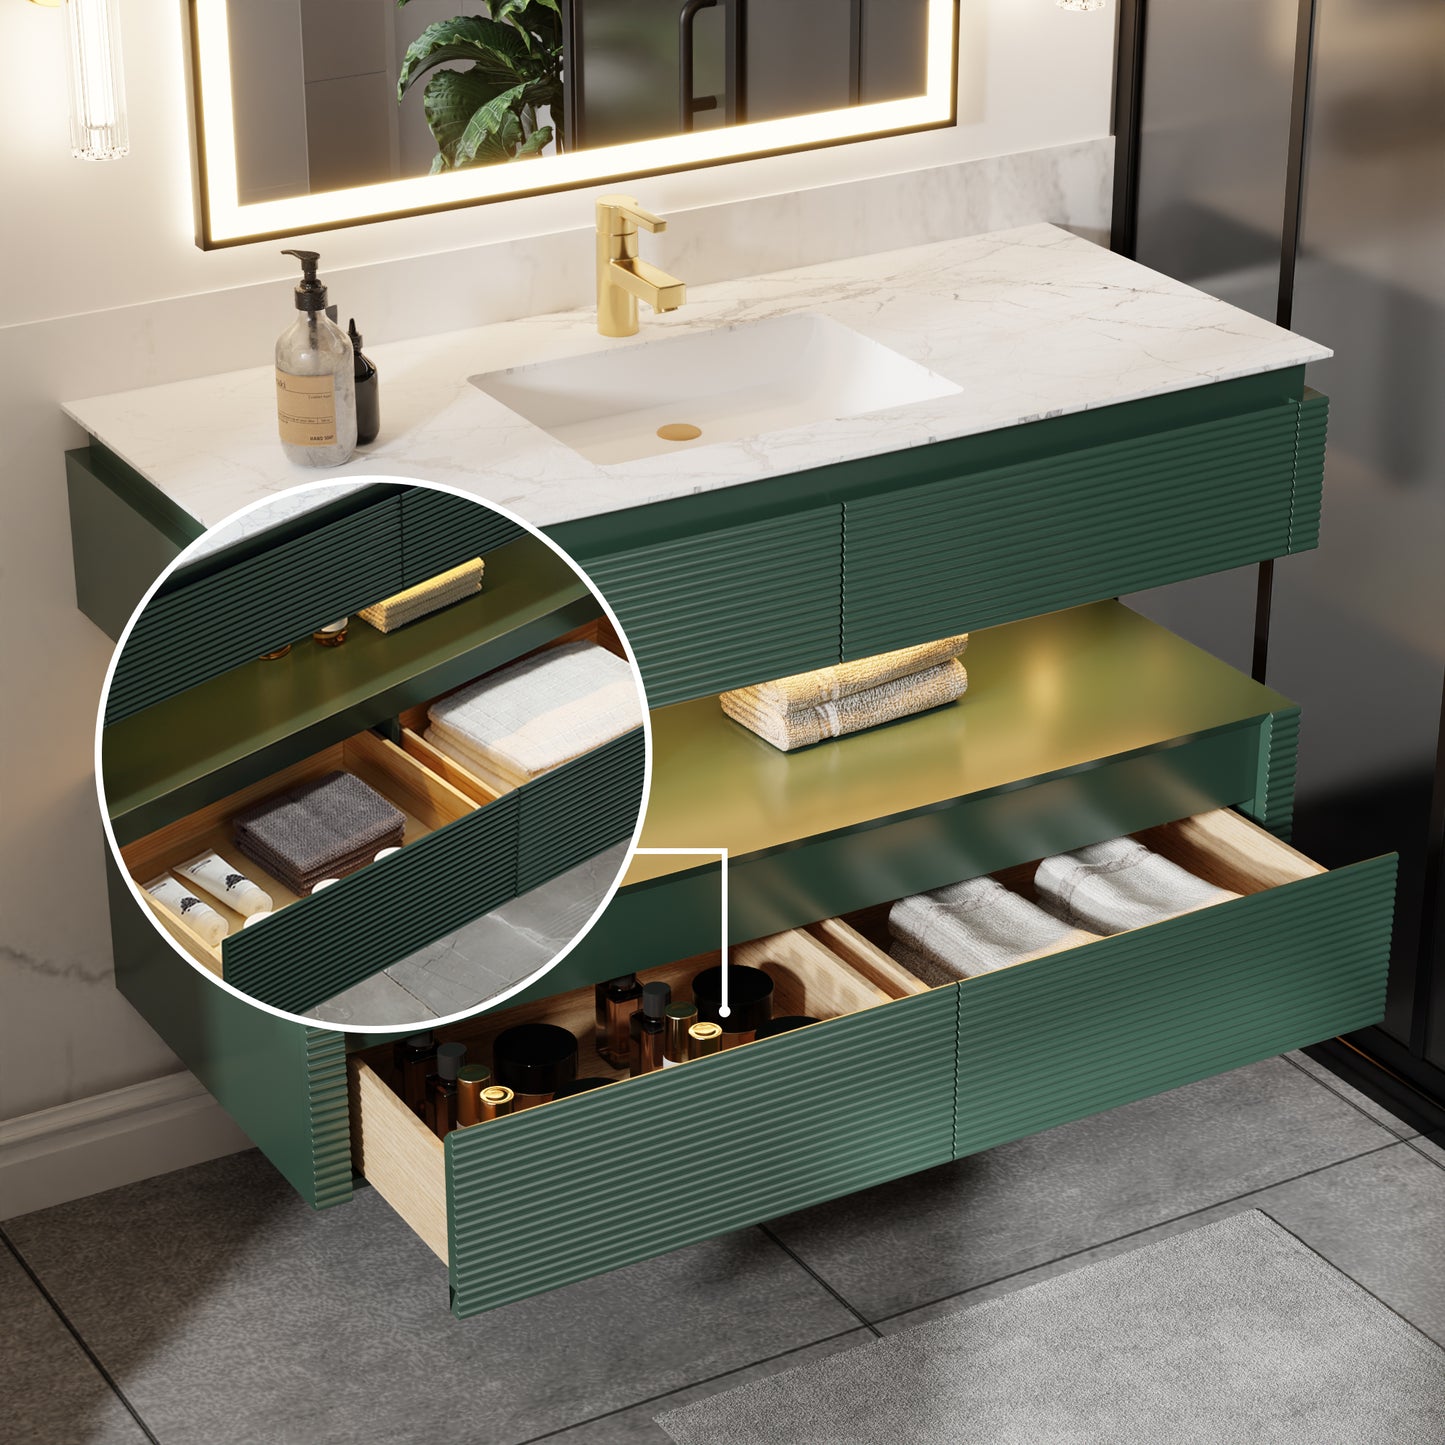 Segeo 48" Modern Solid Oak Floating Bathroom Vanity Cabinet Green with Lights and Artificial Atone Countertop